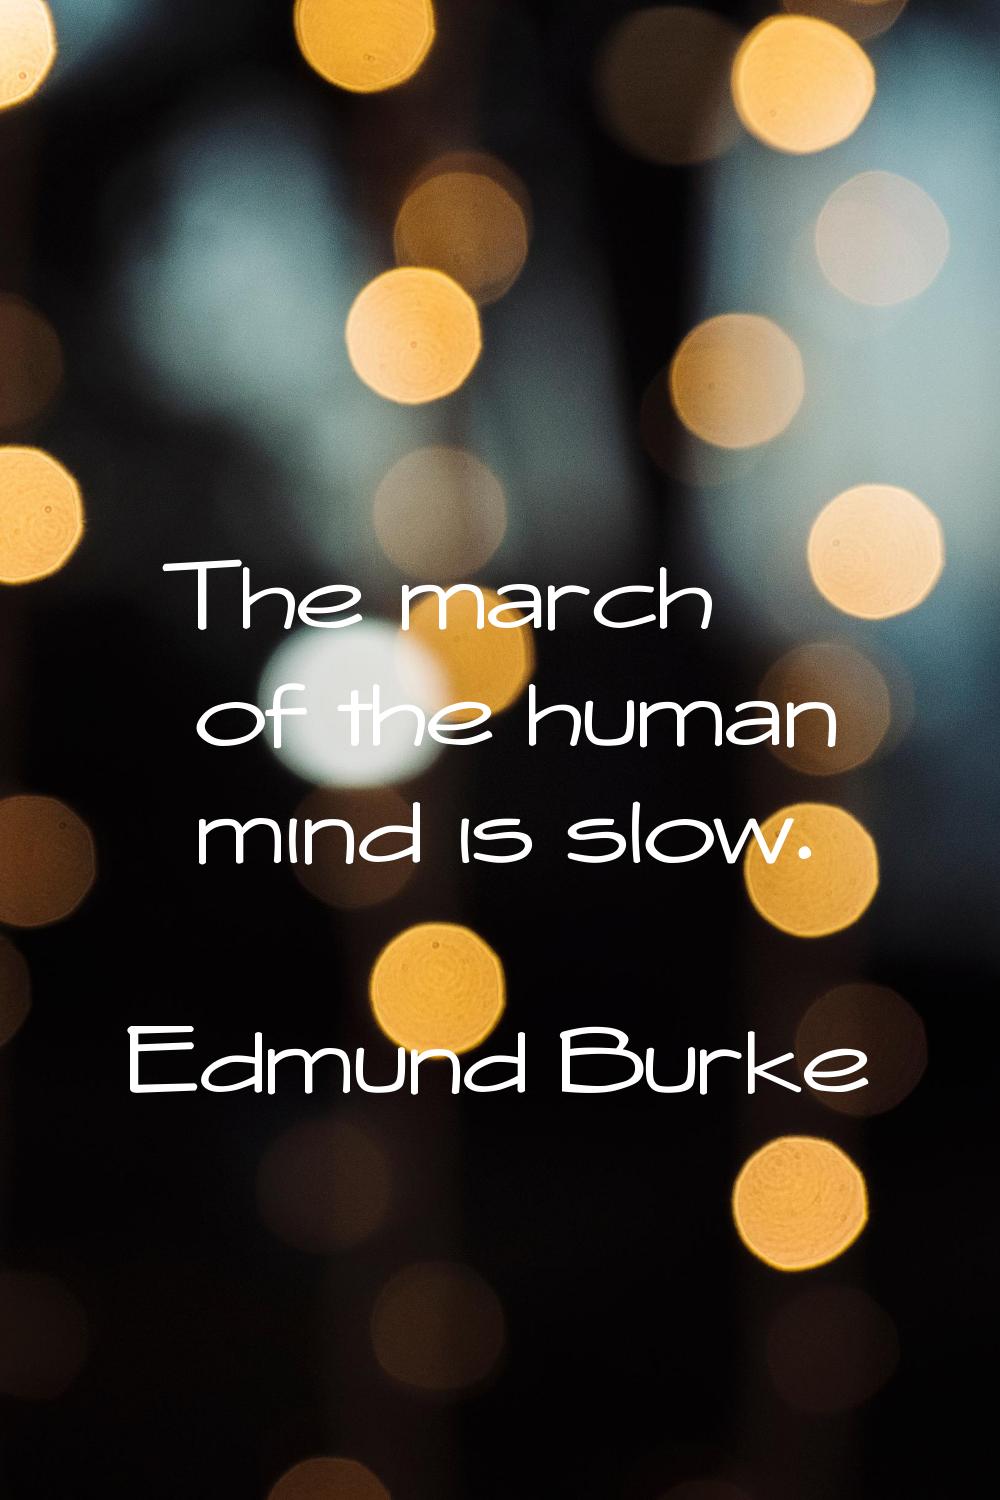 The march of the human mind is slow.